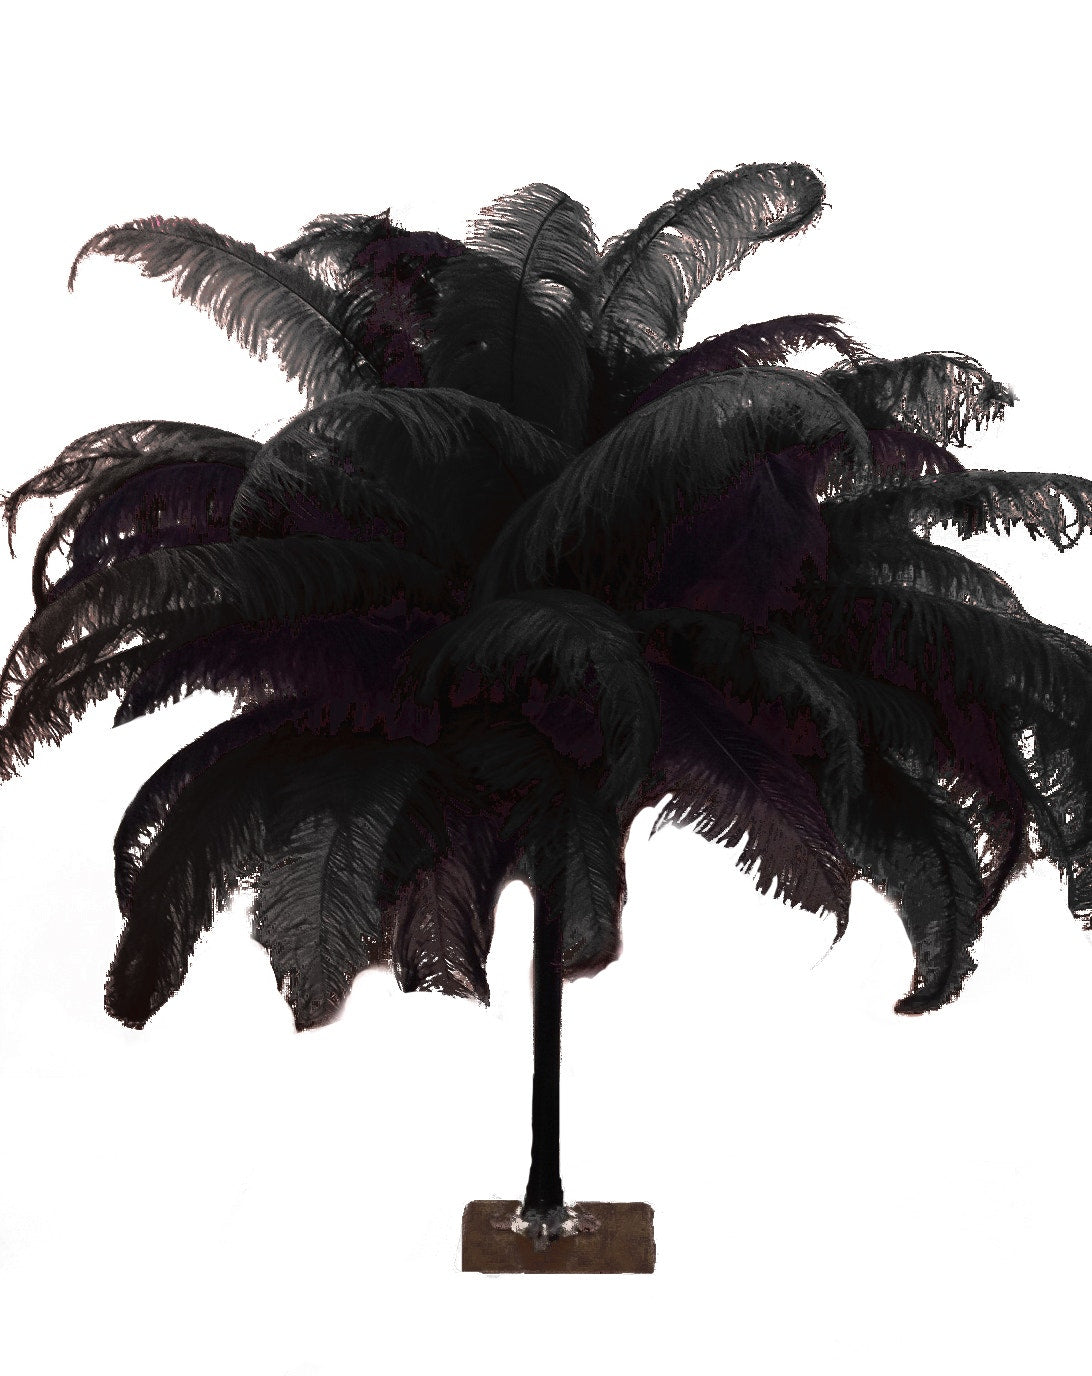 Ostrich Feather Spad Plumes 13-16 (Black) for Sale Online